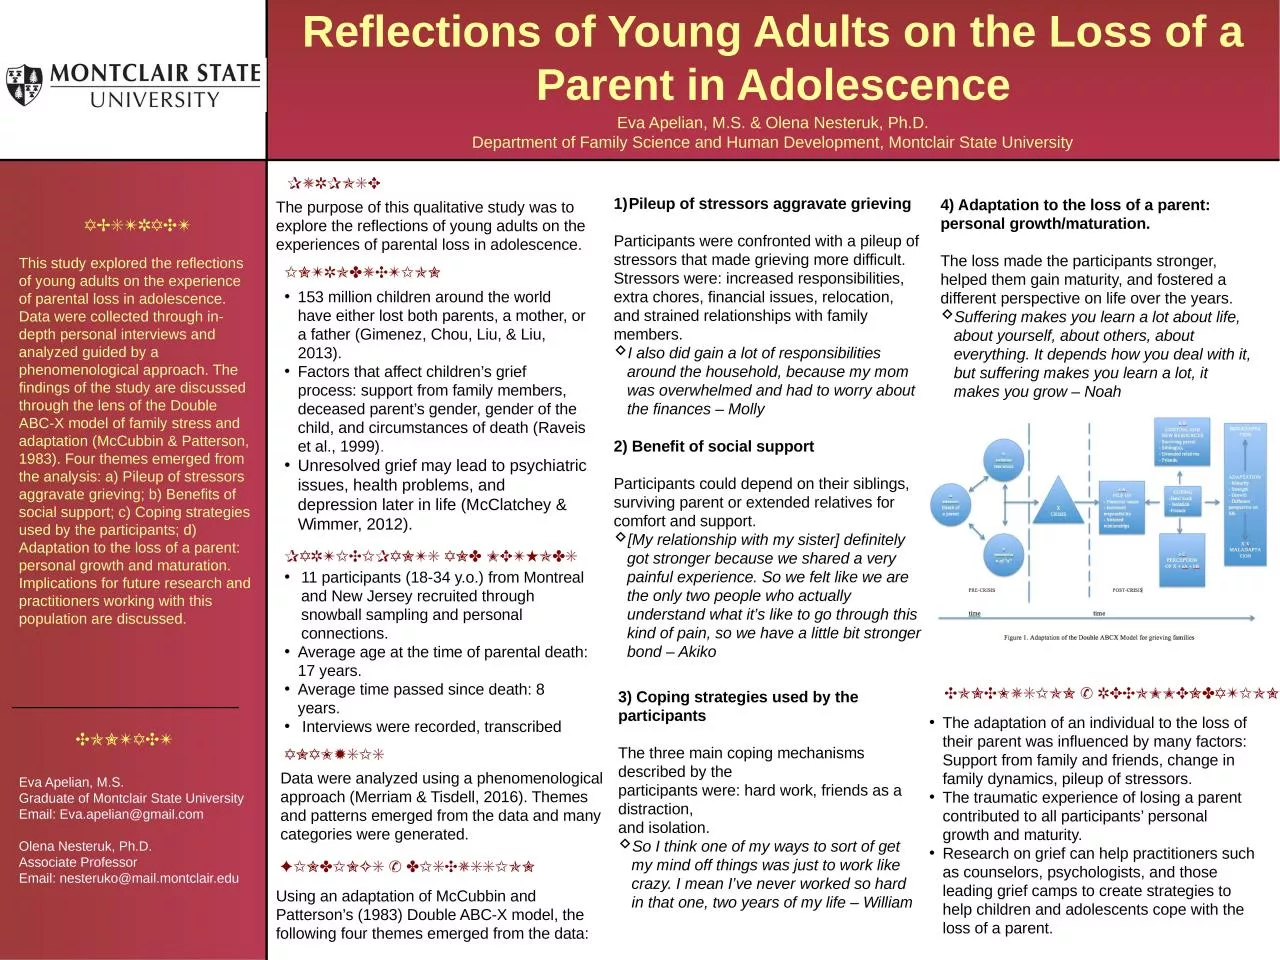 Reflections of Young Adults on the Loss of a Parent in Adolescence